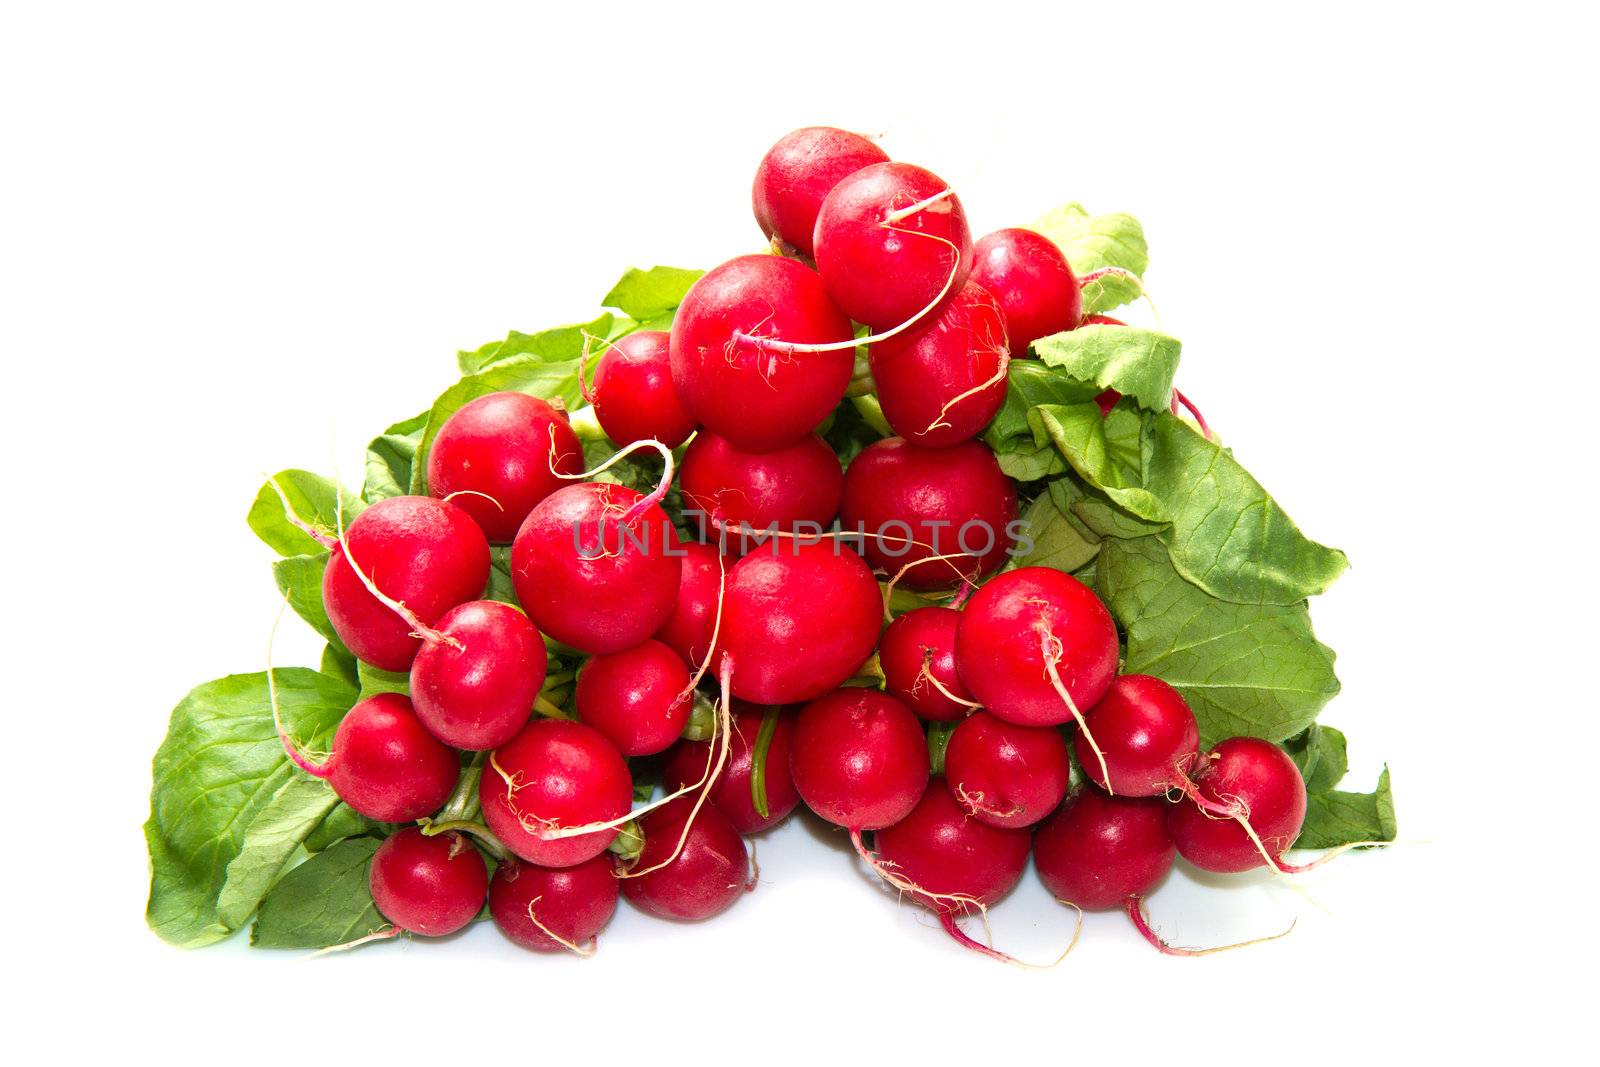 red radishes by lsantilli